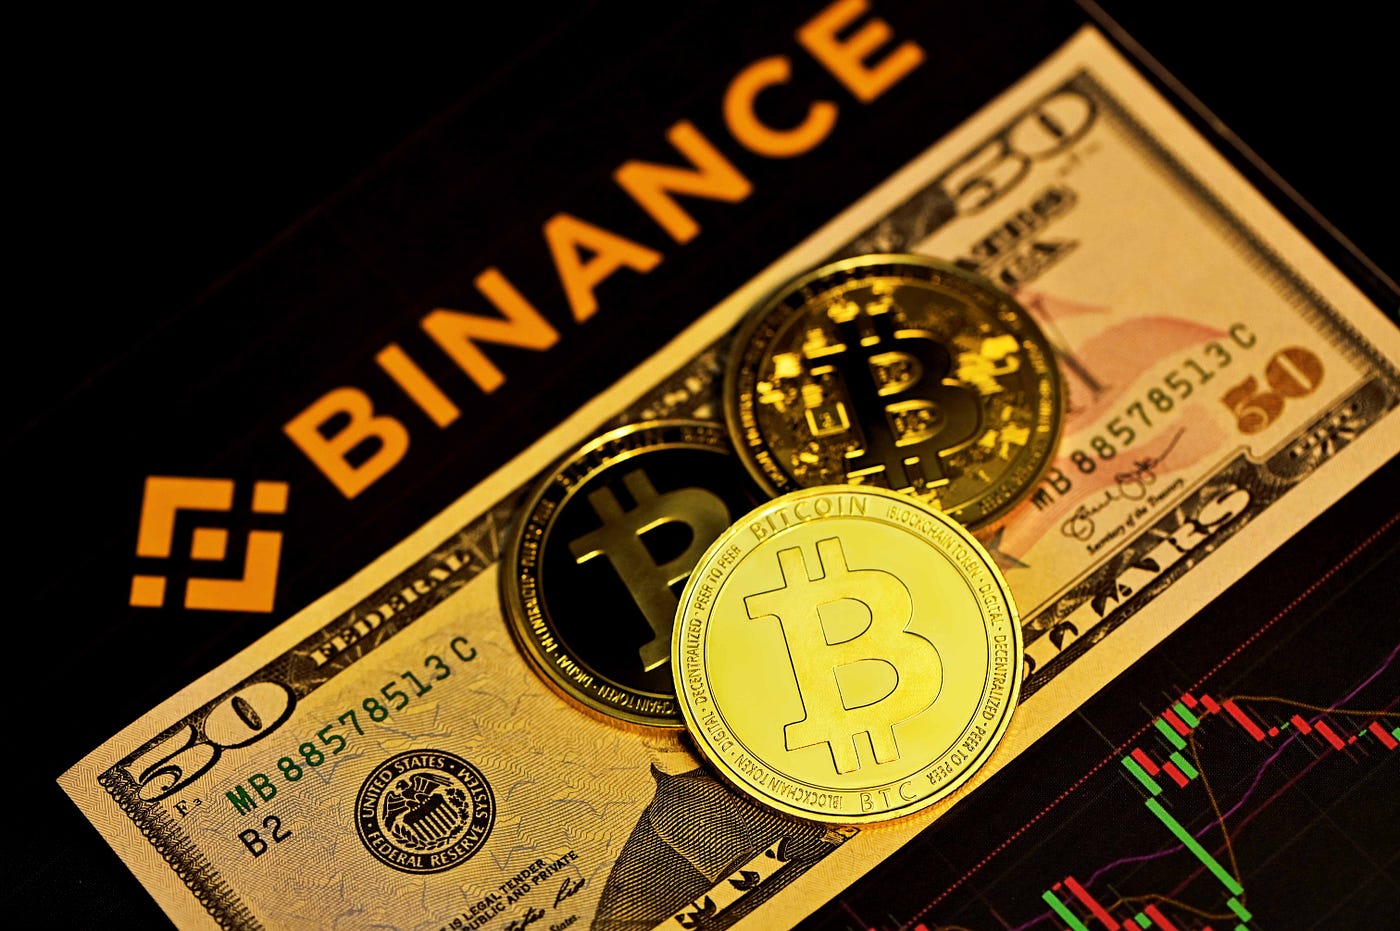 Bitcoin traders hope $27K holds as BTC price